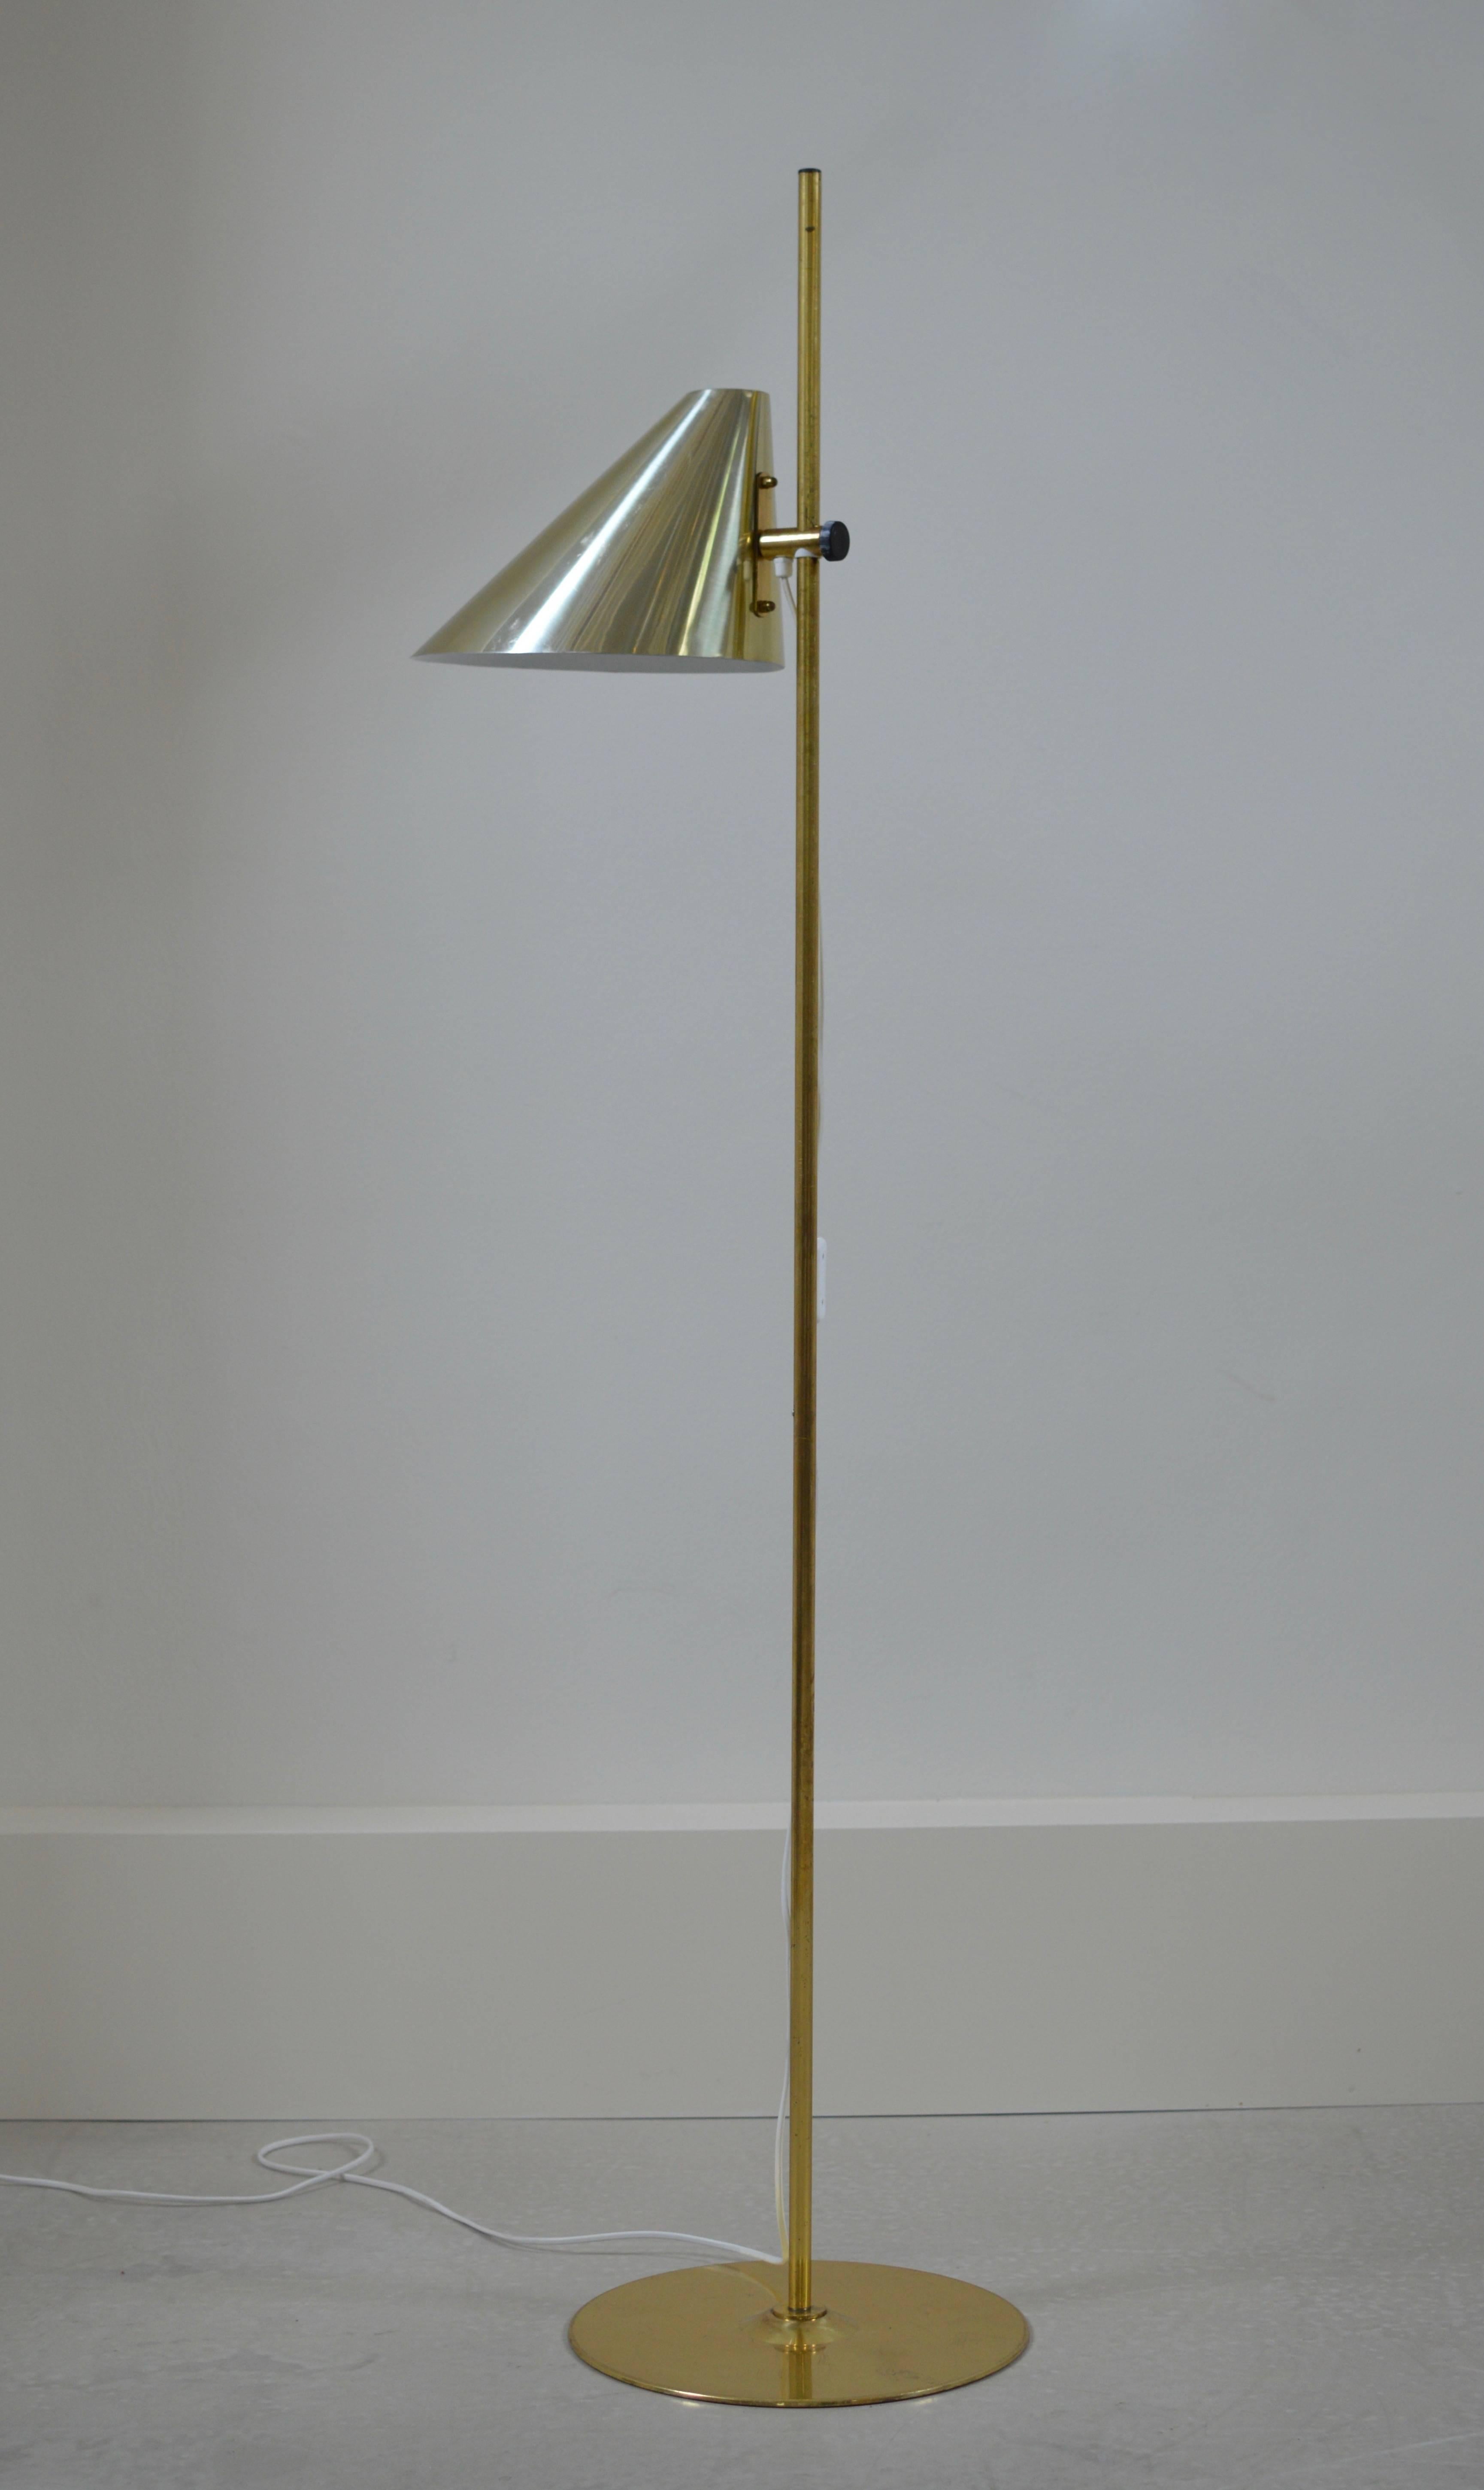 Brass floor lamp with asymmetrical cone shaped shade by Hans-Agne Jakobsson for Markaryd, Sweden. 
Shade is manually height adjustable and comes with original manufacture label.

Lamp is executed with original wiring which works very well, we can